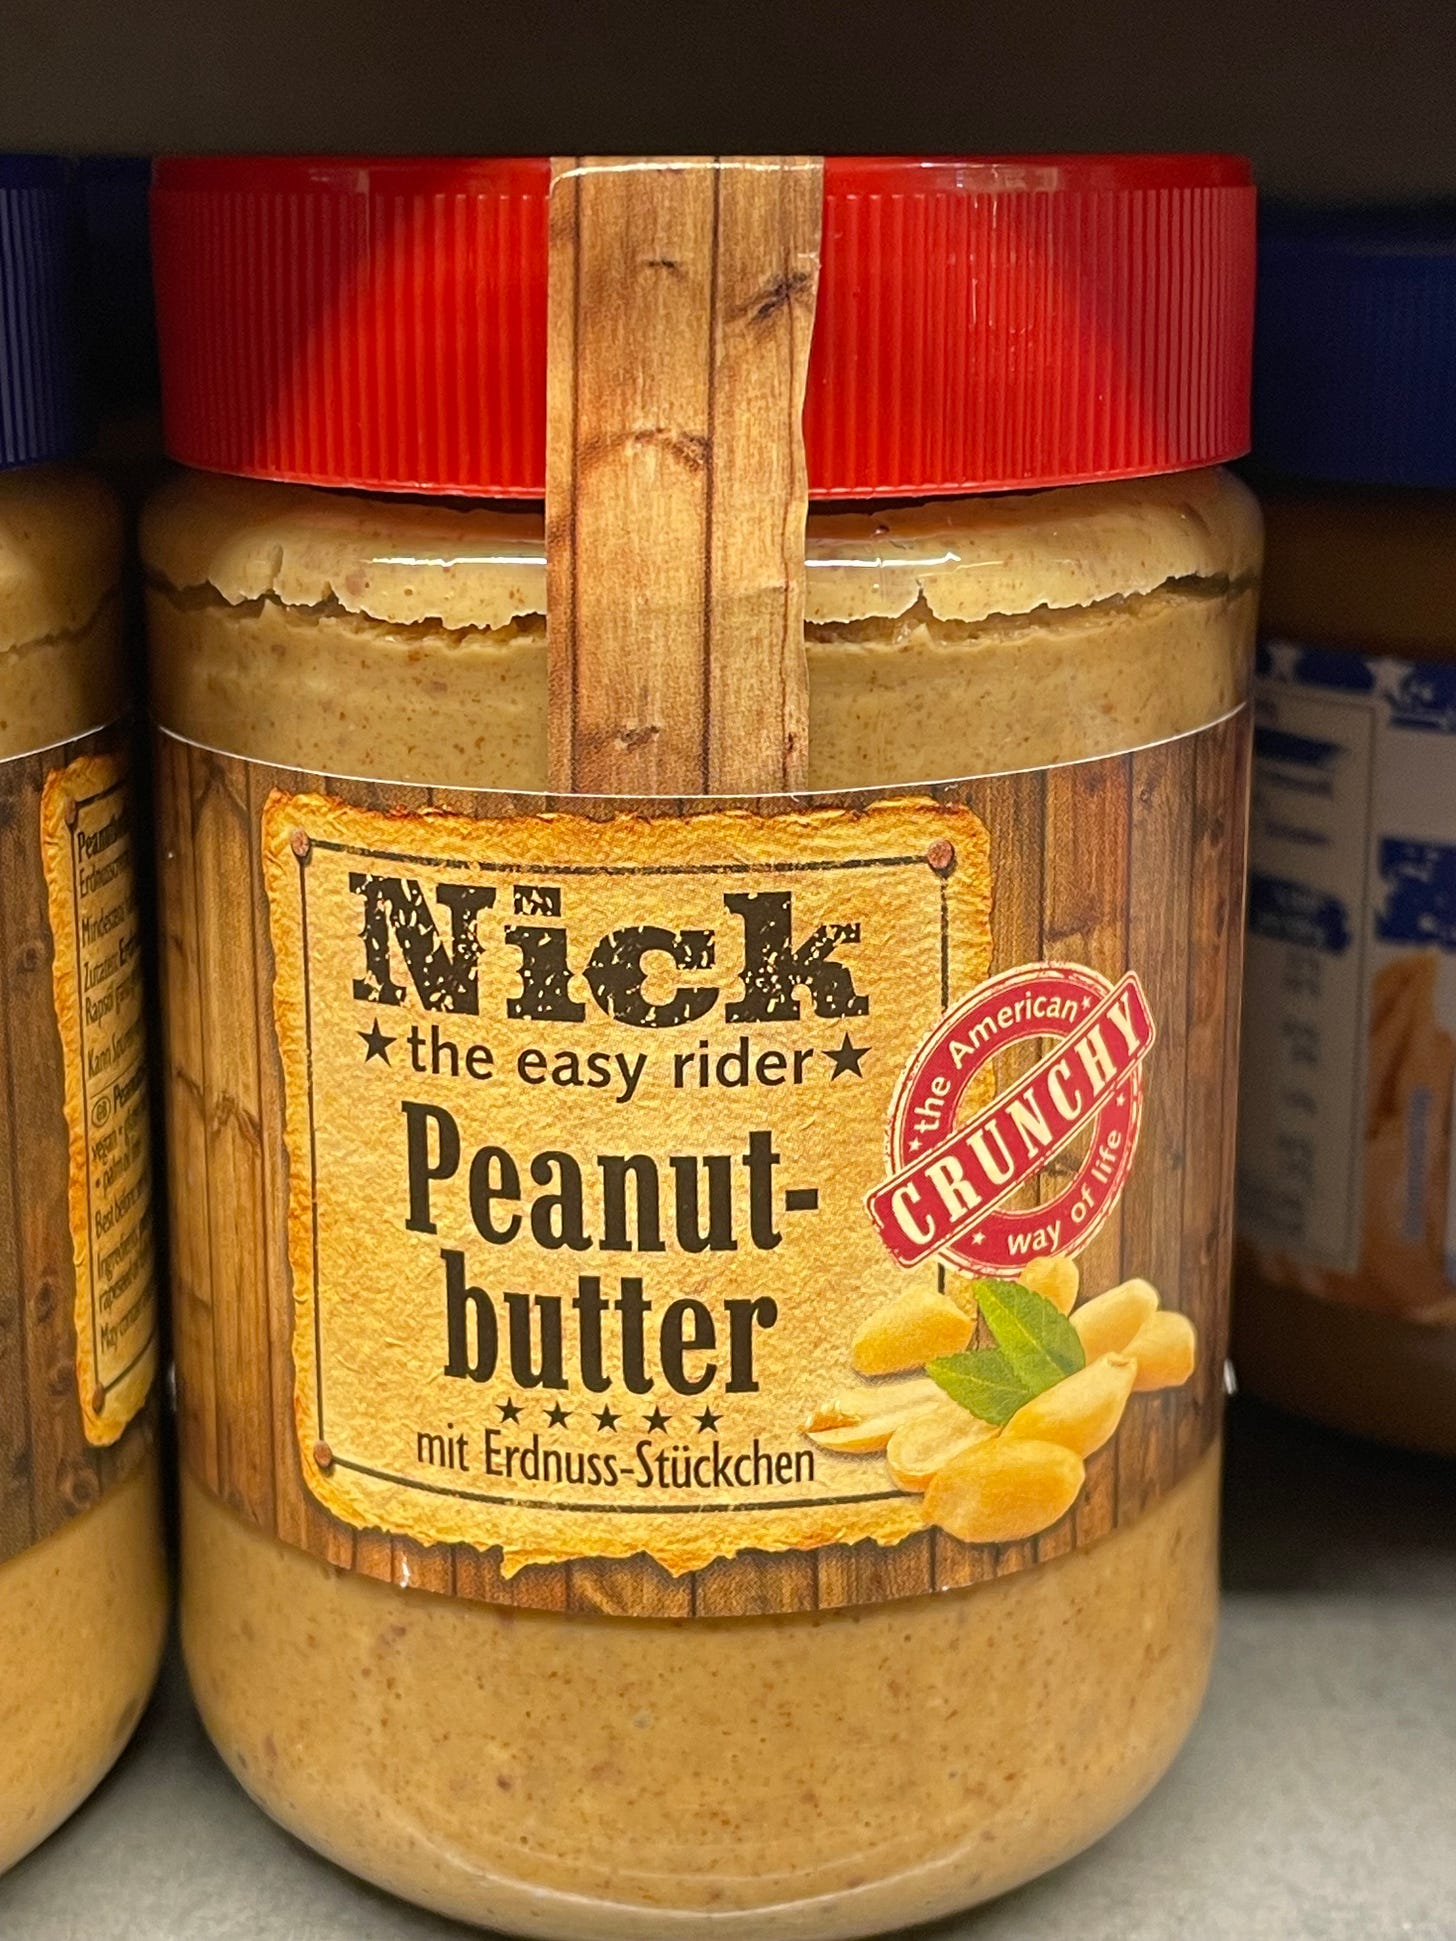 Nick the easy rider peanut butter